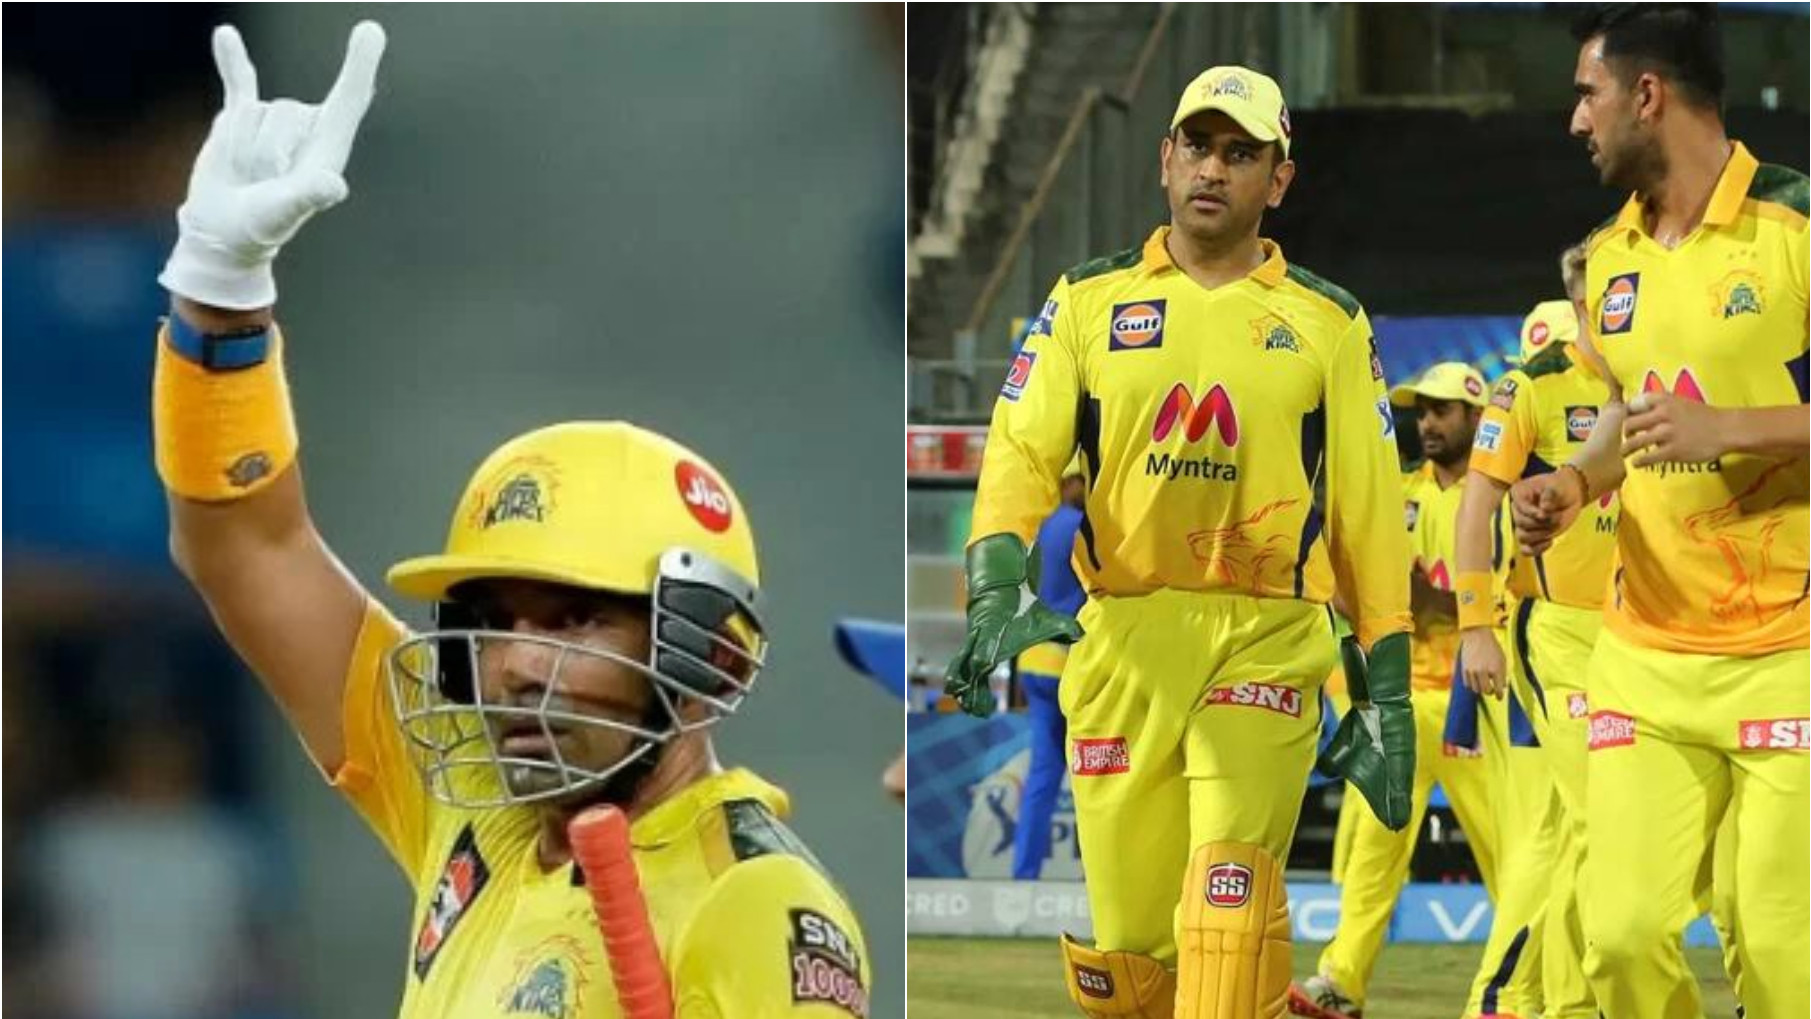 IPL 2022: “You will get 4 or 5 games for sure”, Uthappa recalls first conversation with Dhoni after joining CSK